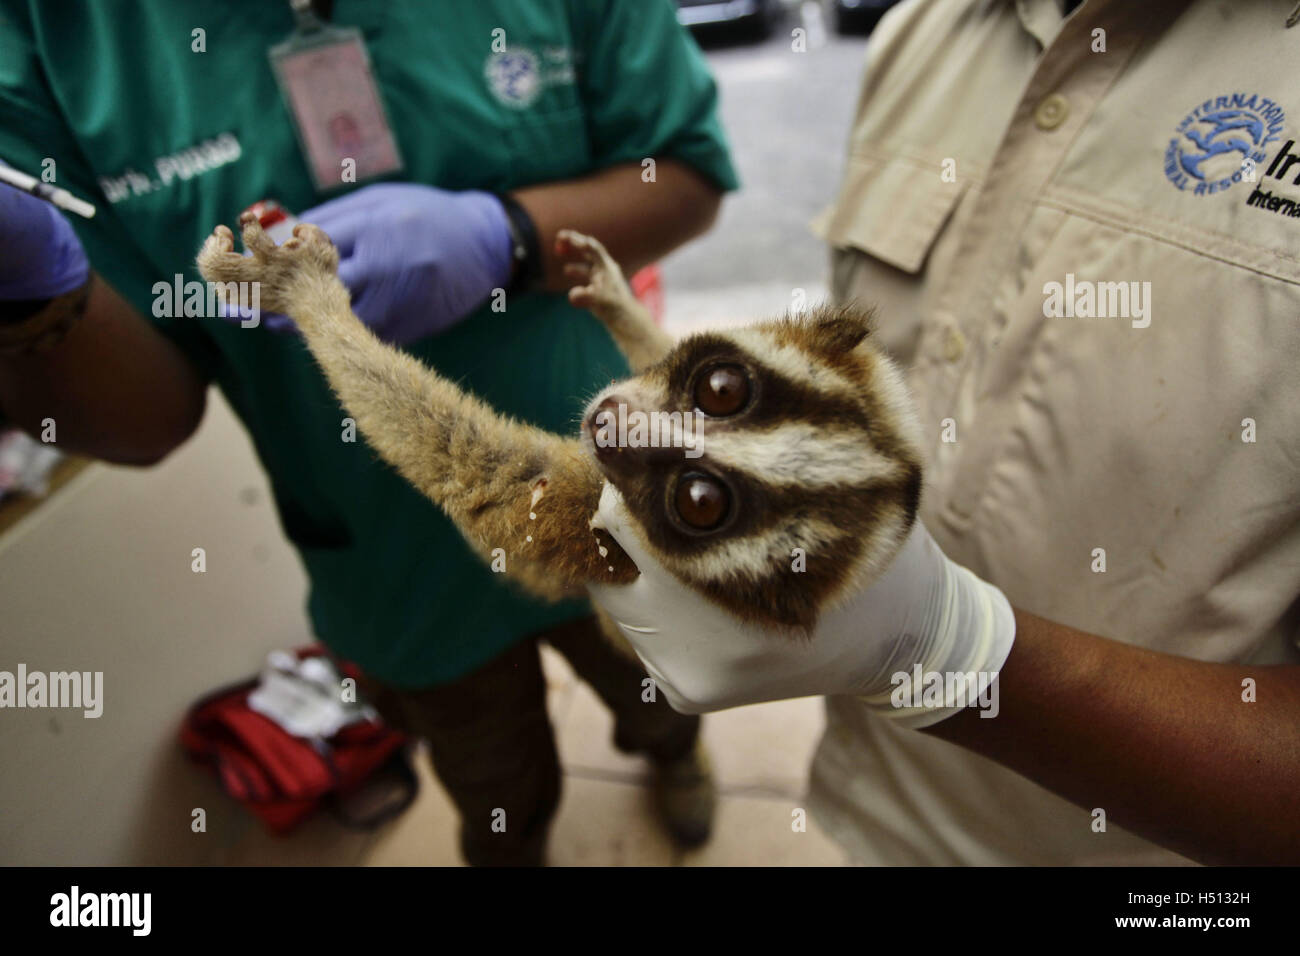 Bandung, Indonesia. 18th Oct, 2016. A Javan slow loris receives medical treatment by doctors from International Animal Rescue (IAR) after being rescued from illegal smuggling in Bandung, Indonesia, on Oct. 18, 2016. The Javan slow loris is one of the world's most endangered species. © Banyu Biru/Xinhua/Alamy Live News Stock Photo